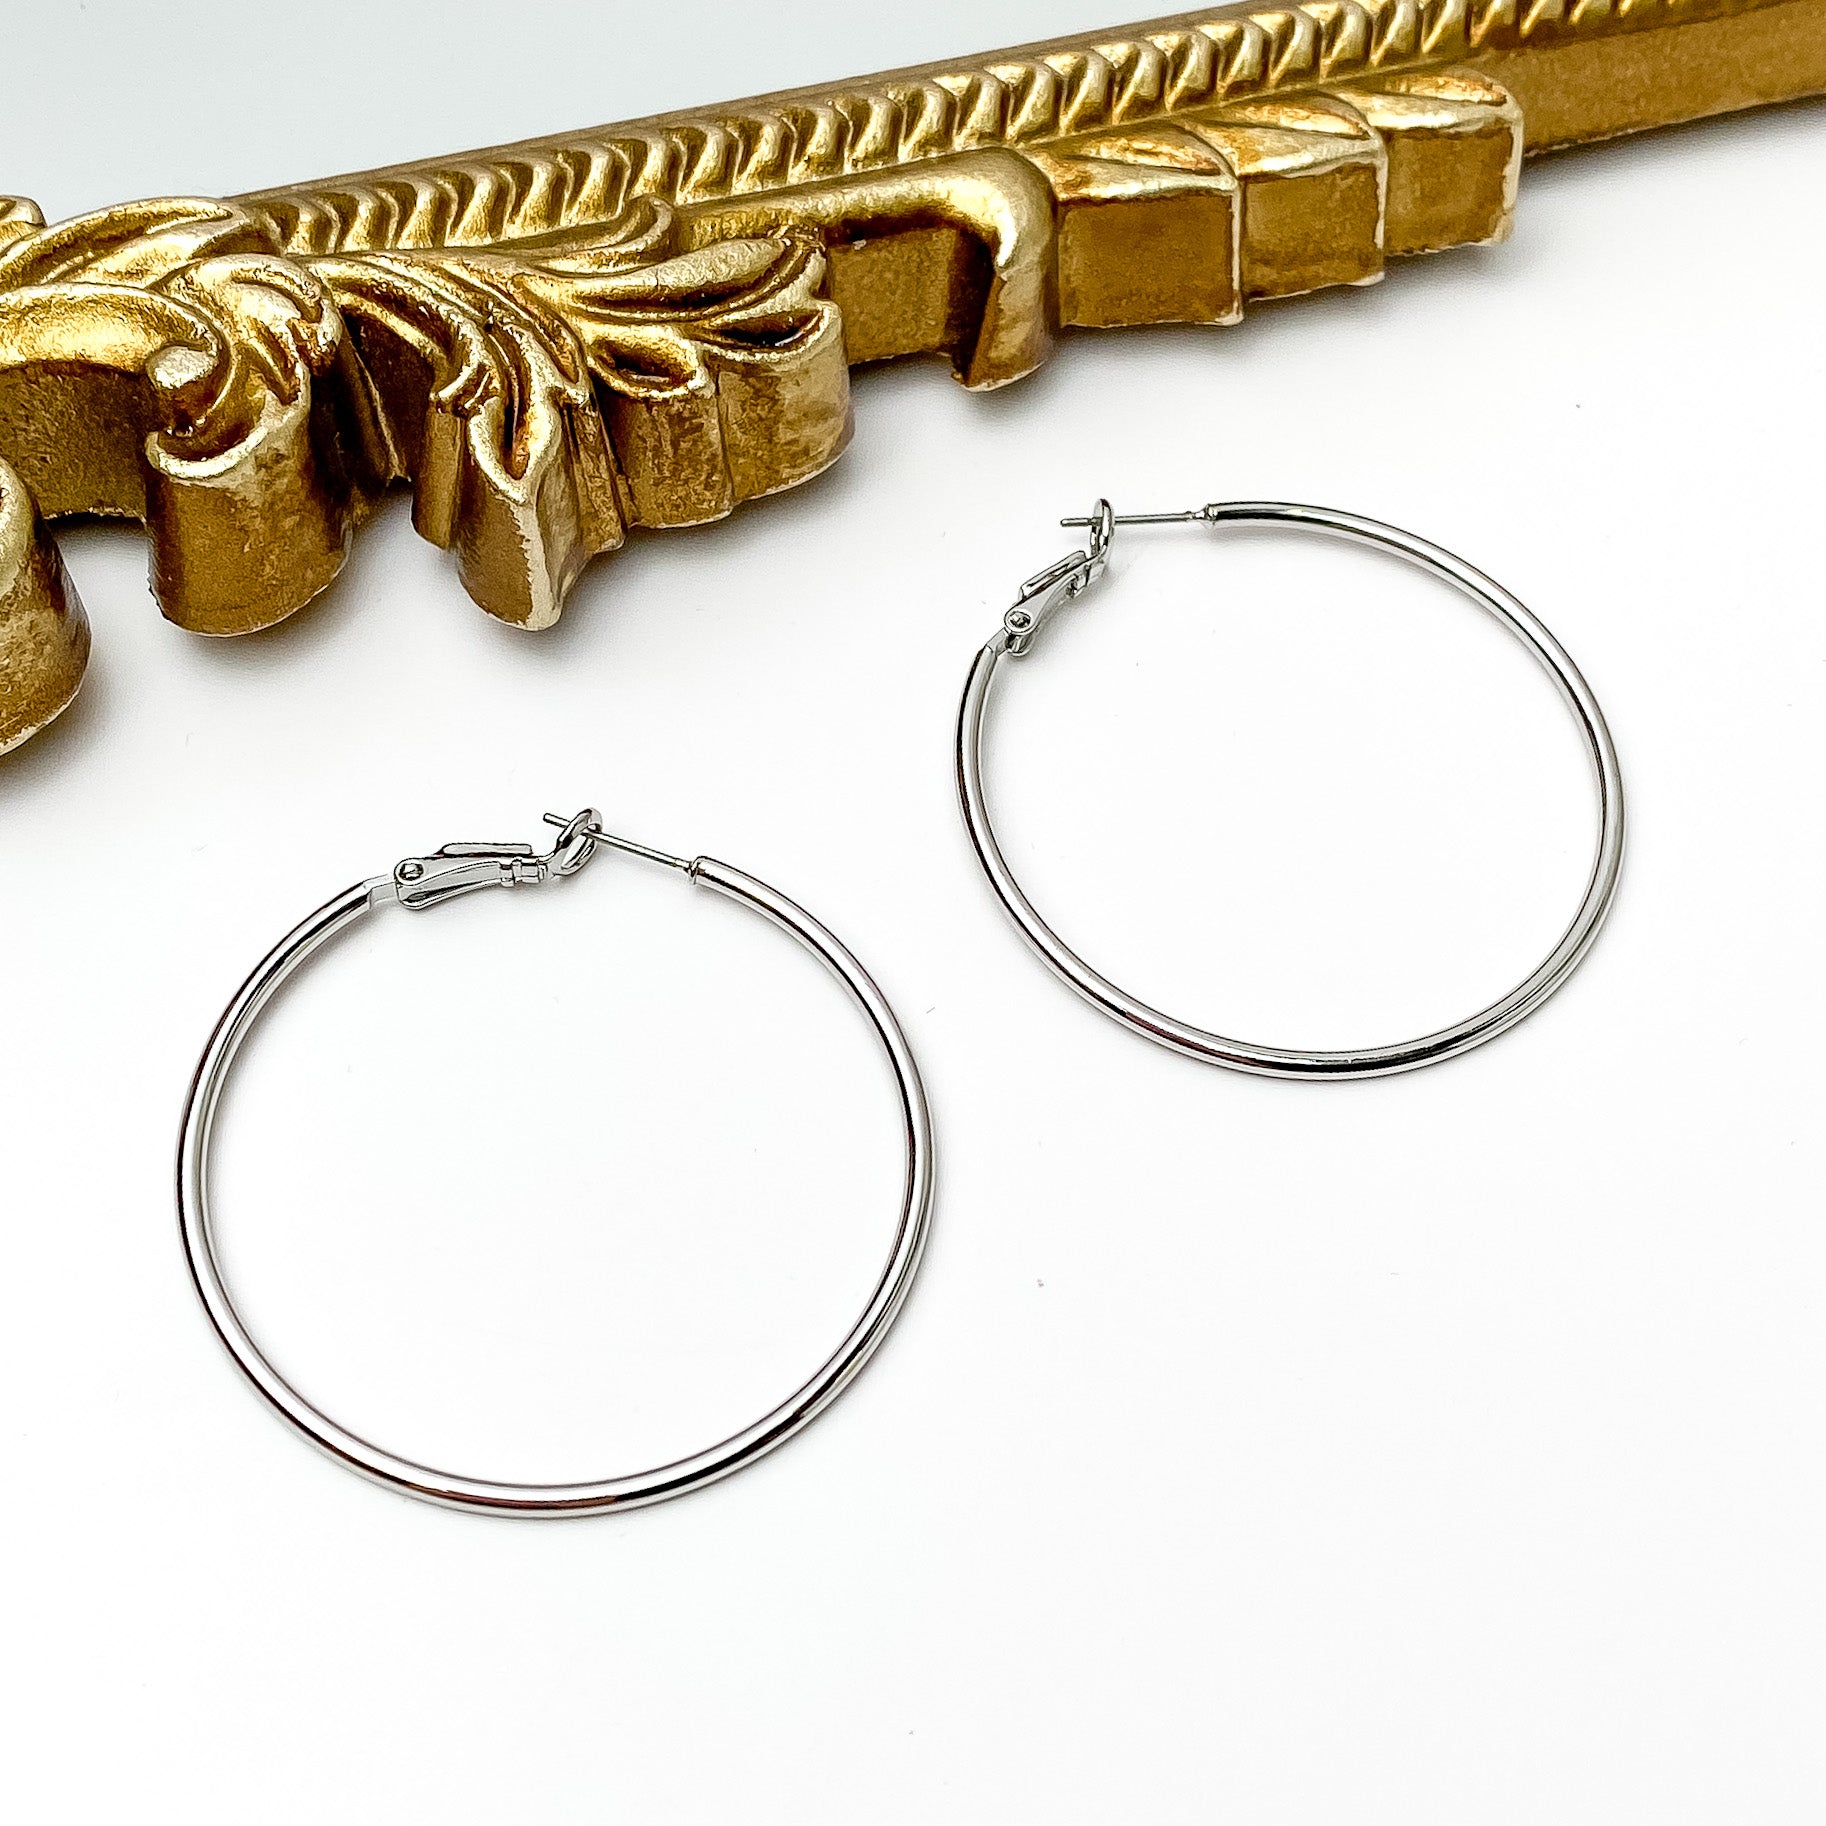 Pictured are a pair of silver hoop earrings. These earrings are pictured in front of a gold mirror on a white background. 